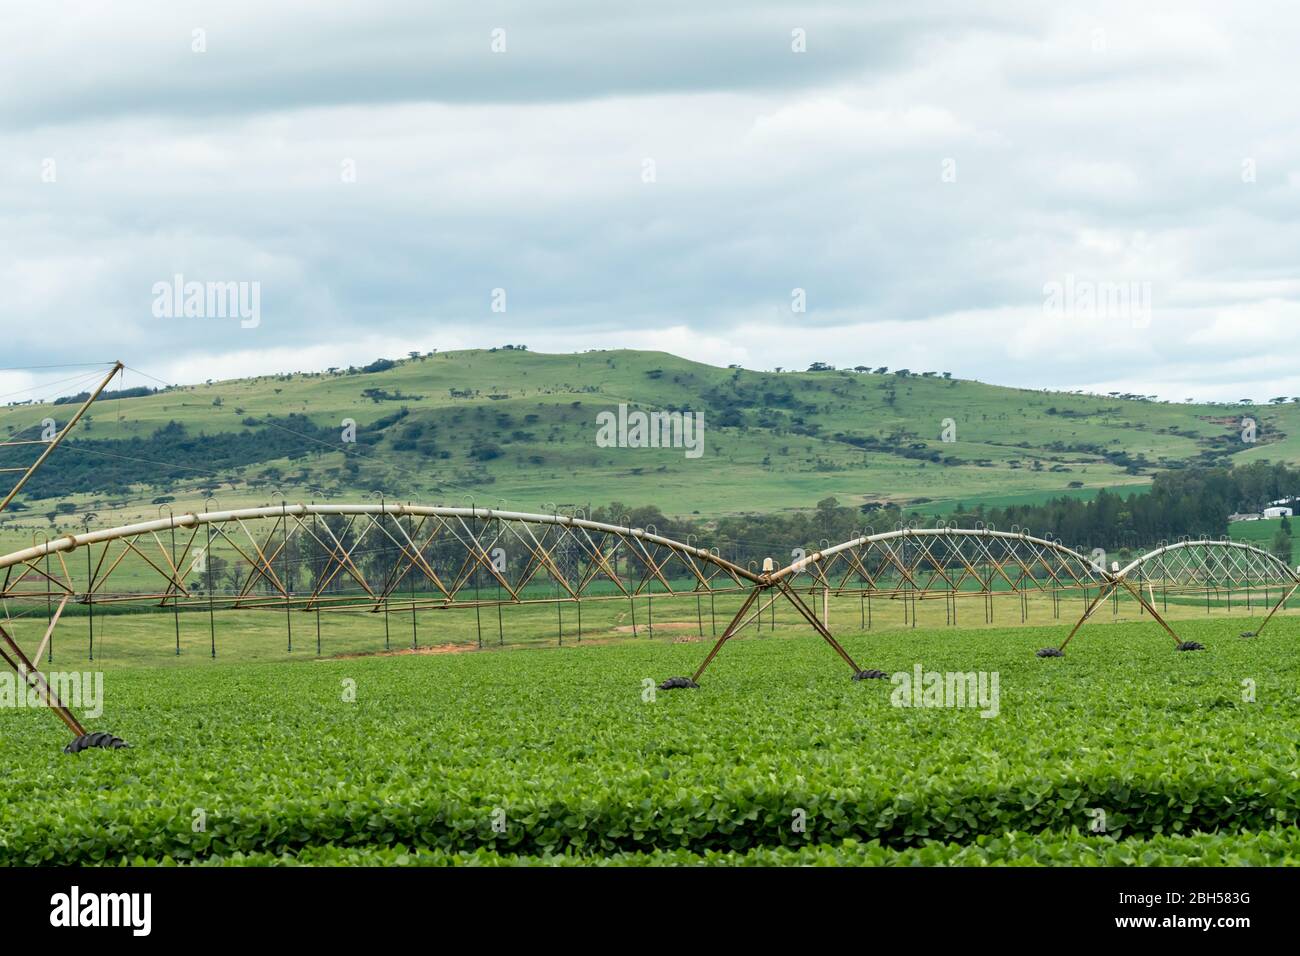 centre pivot irrigation, water wheel, circle irrigation a form of overhead sprinkler which is a method of crop irrigation on a farm in South Africa Stock Photo